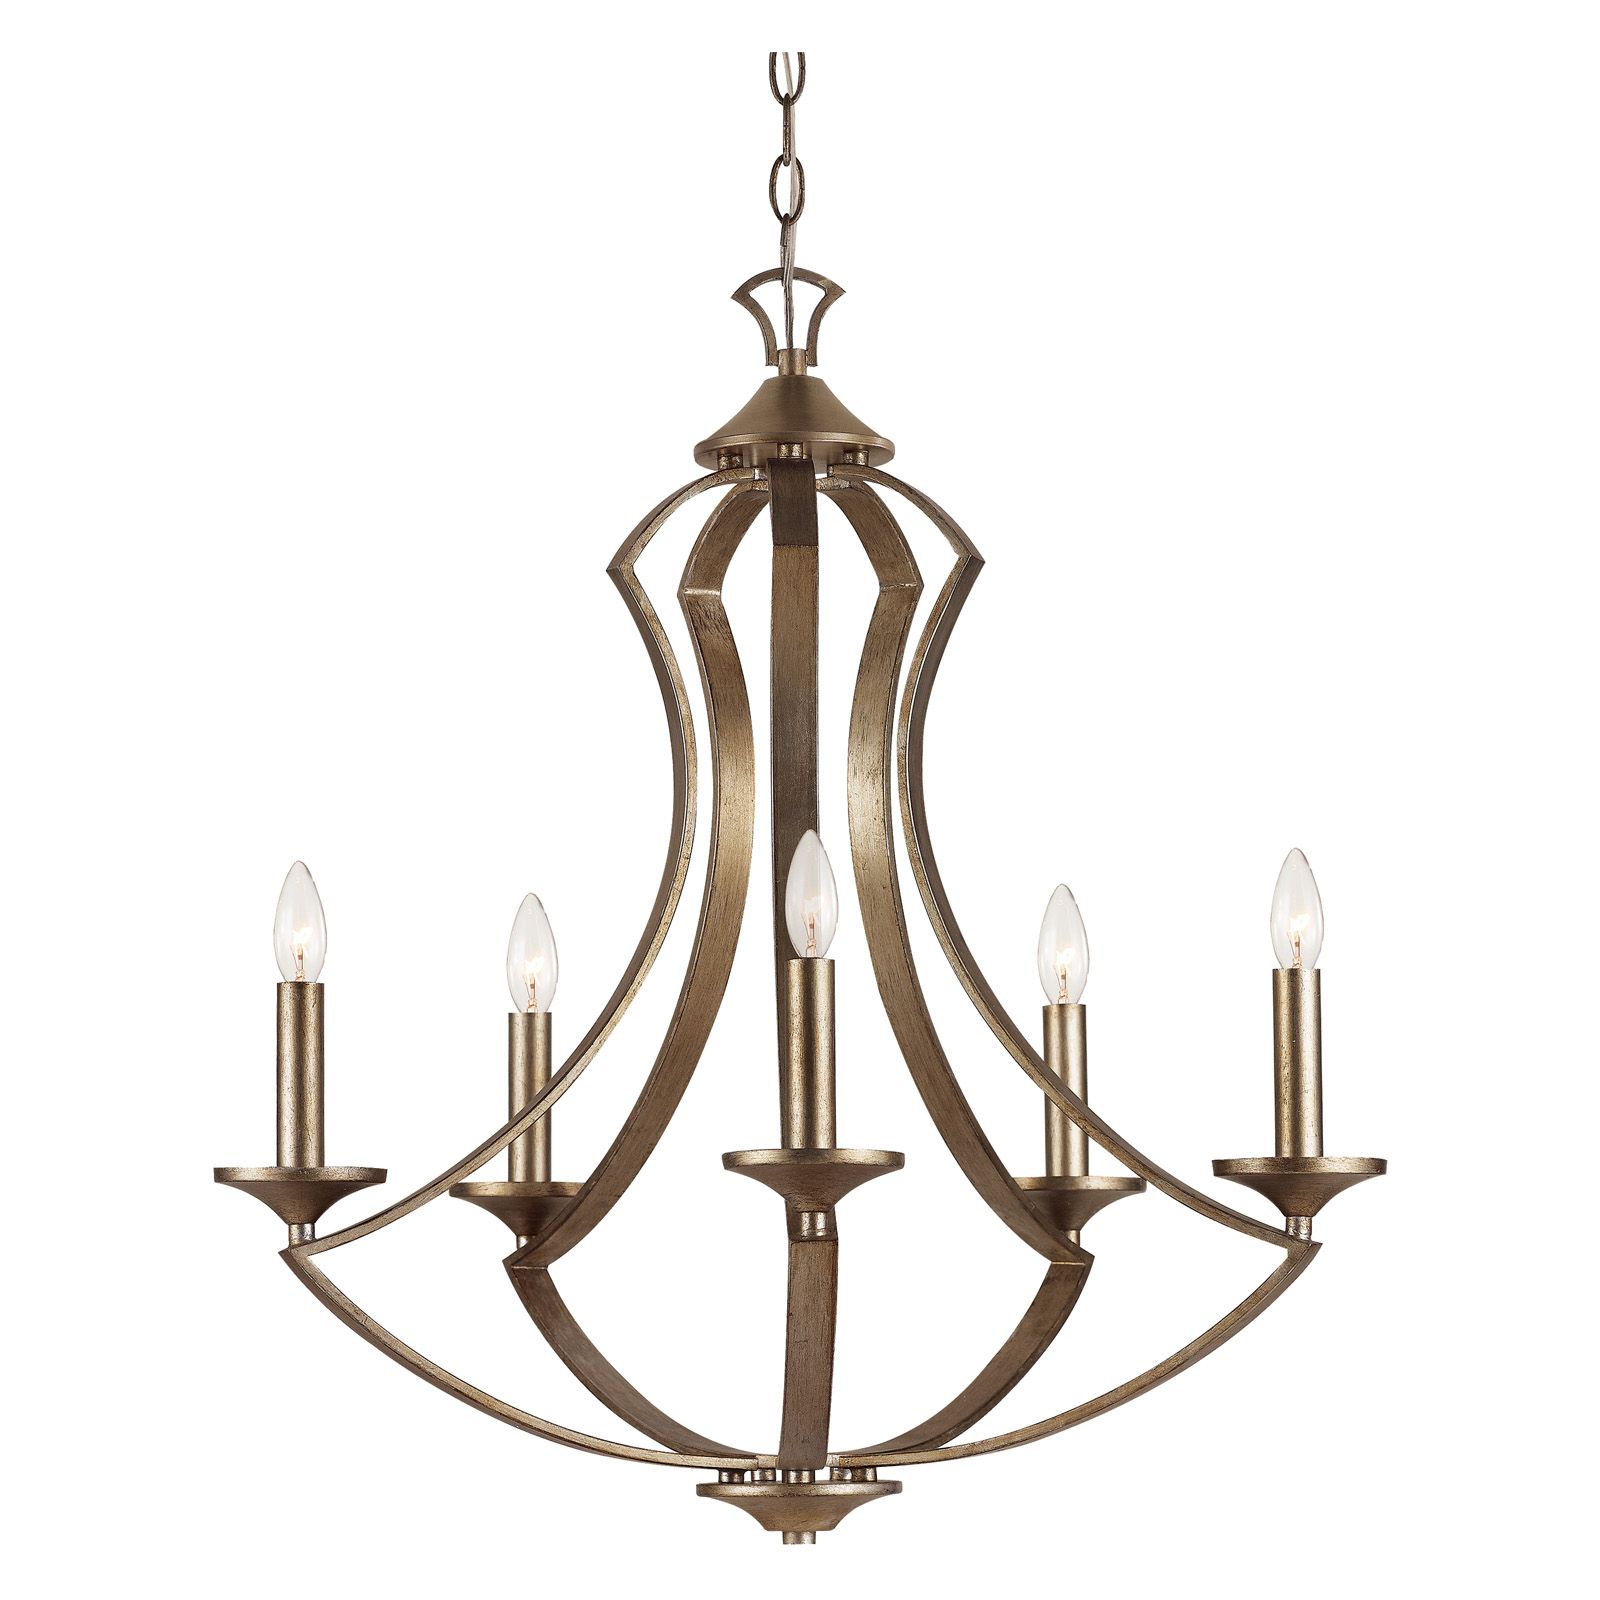 Winter Gold Chandeliers With Regard To Current Transglobe Silver Leaf 70306 5 Light Chandelier – Winter (View 20 of 20)